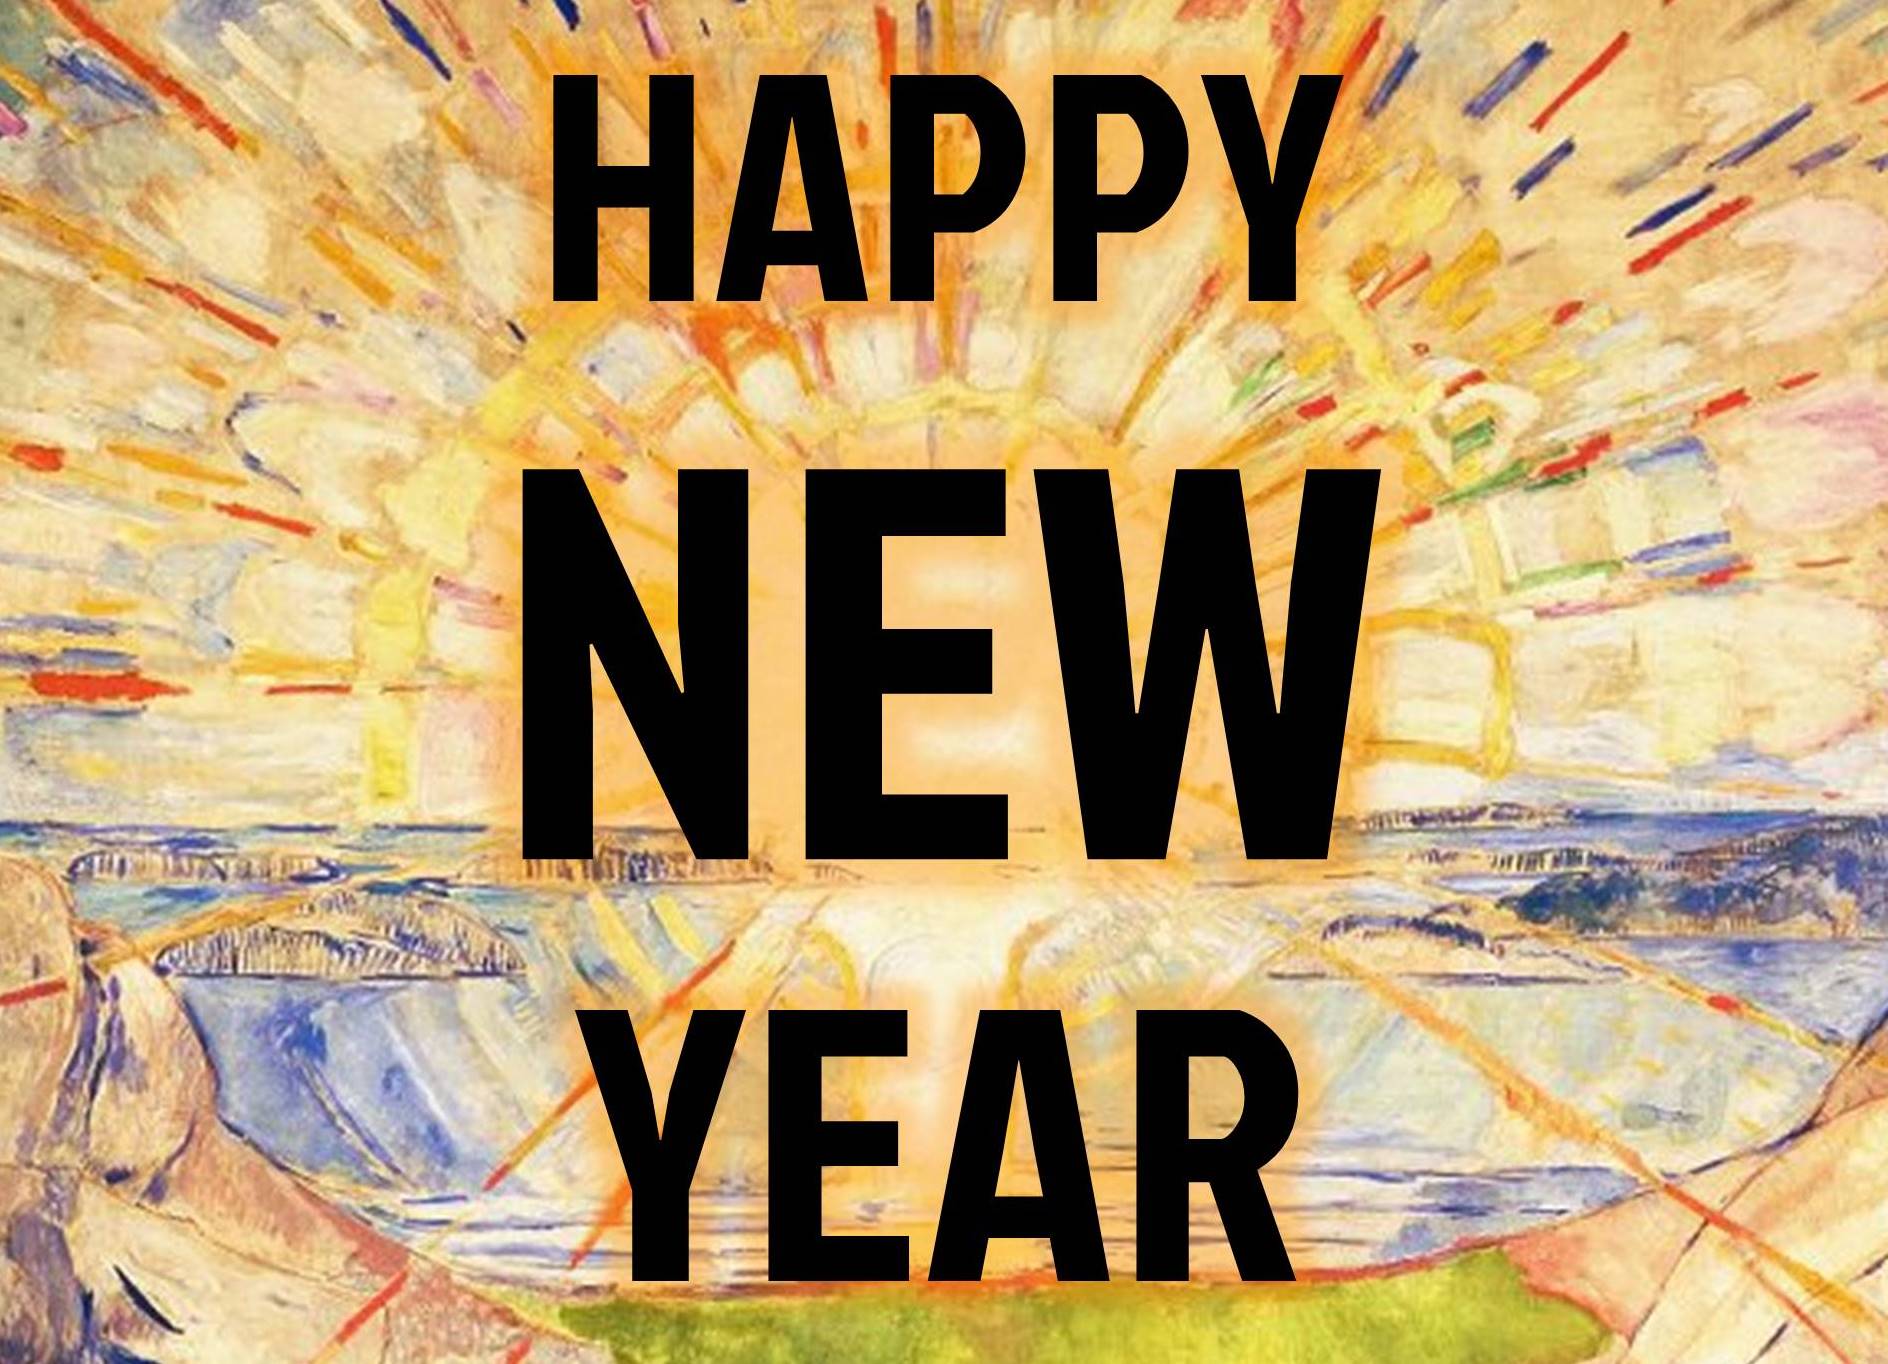 Painting of brightly shining rising sun with the text 'HAPPY NEW YEAR' over it.